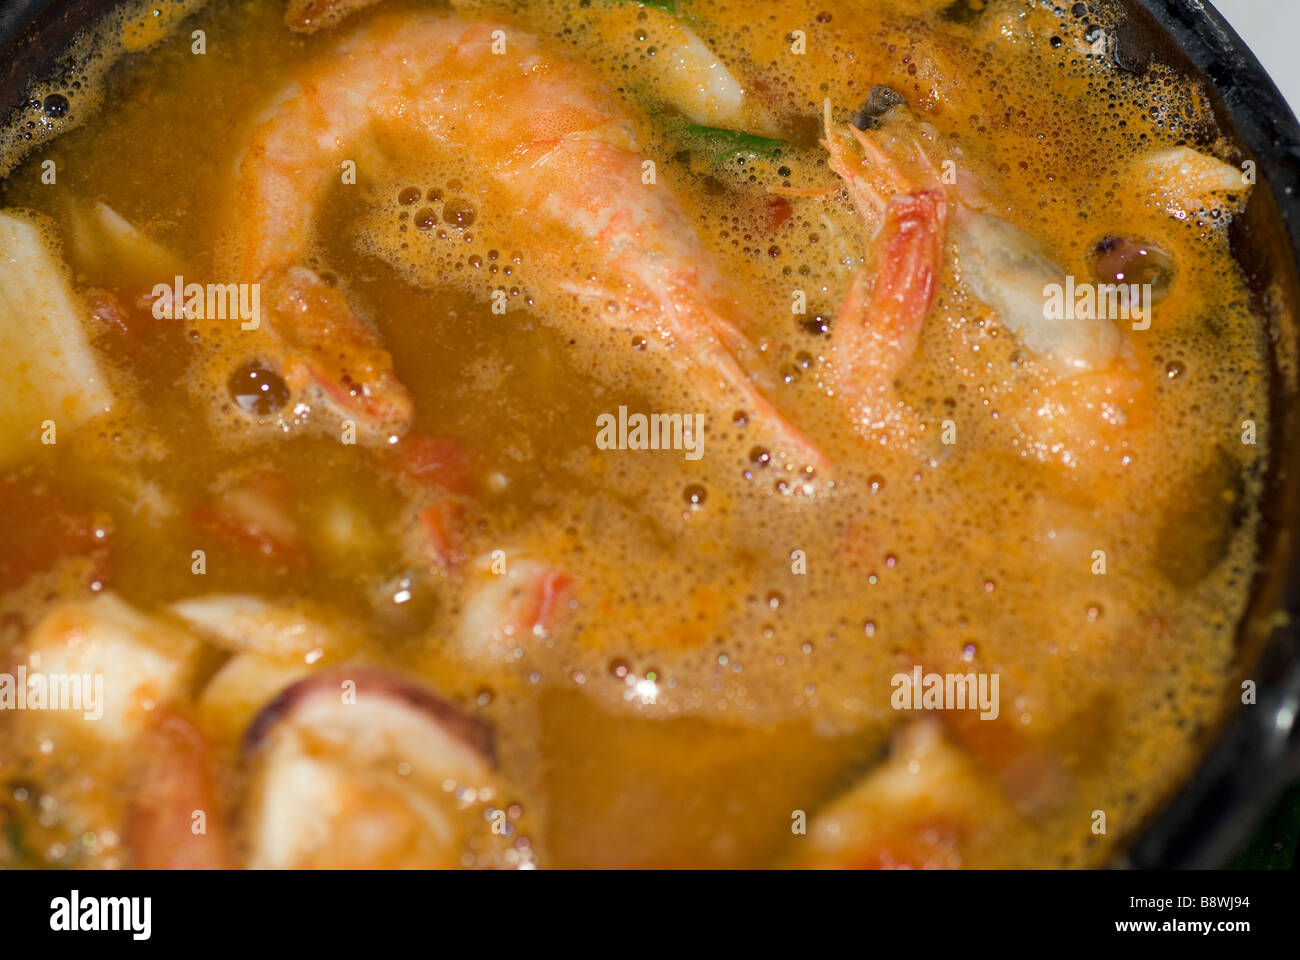 a soup with seafood Stock Photo